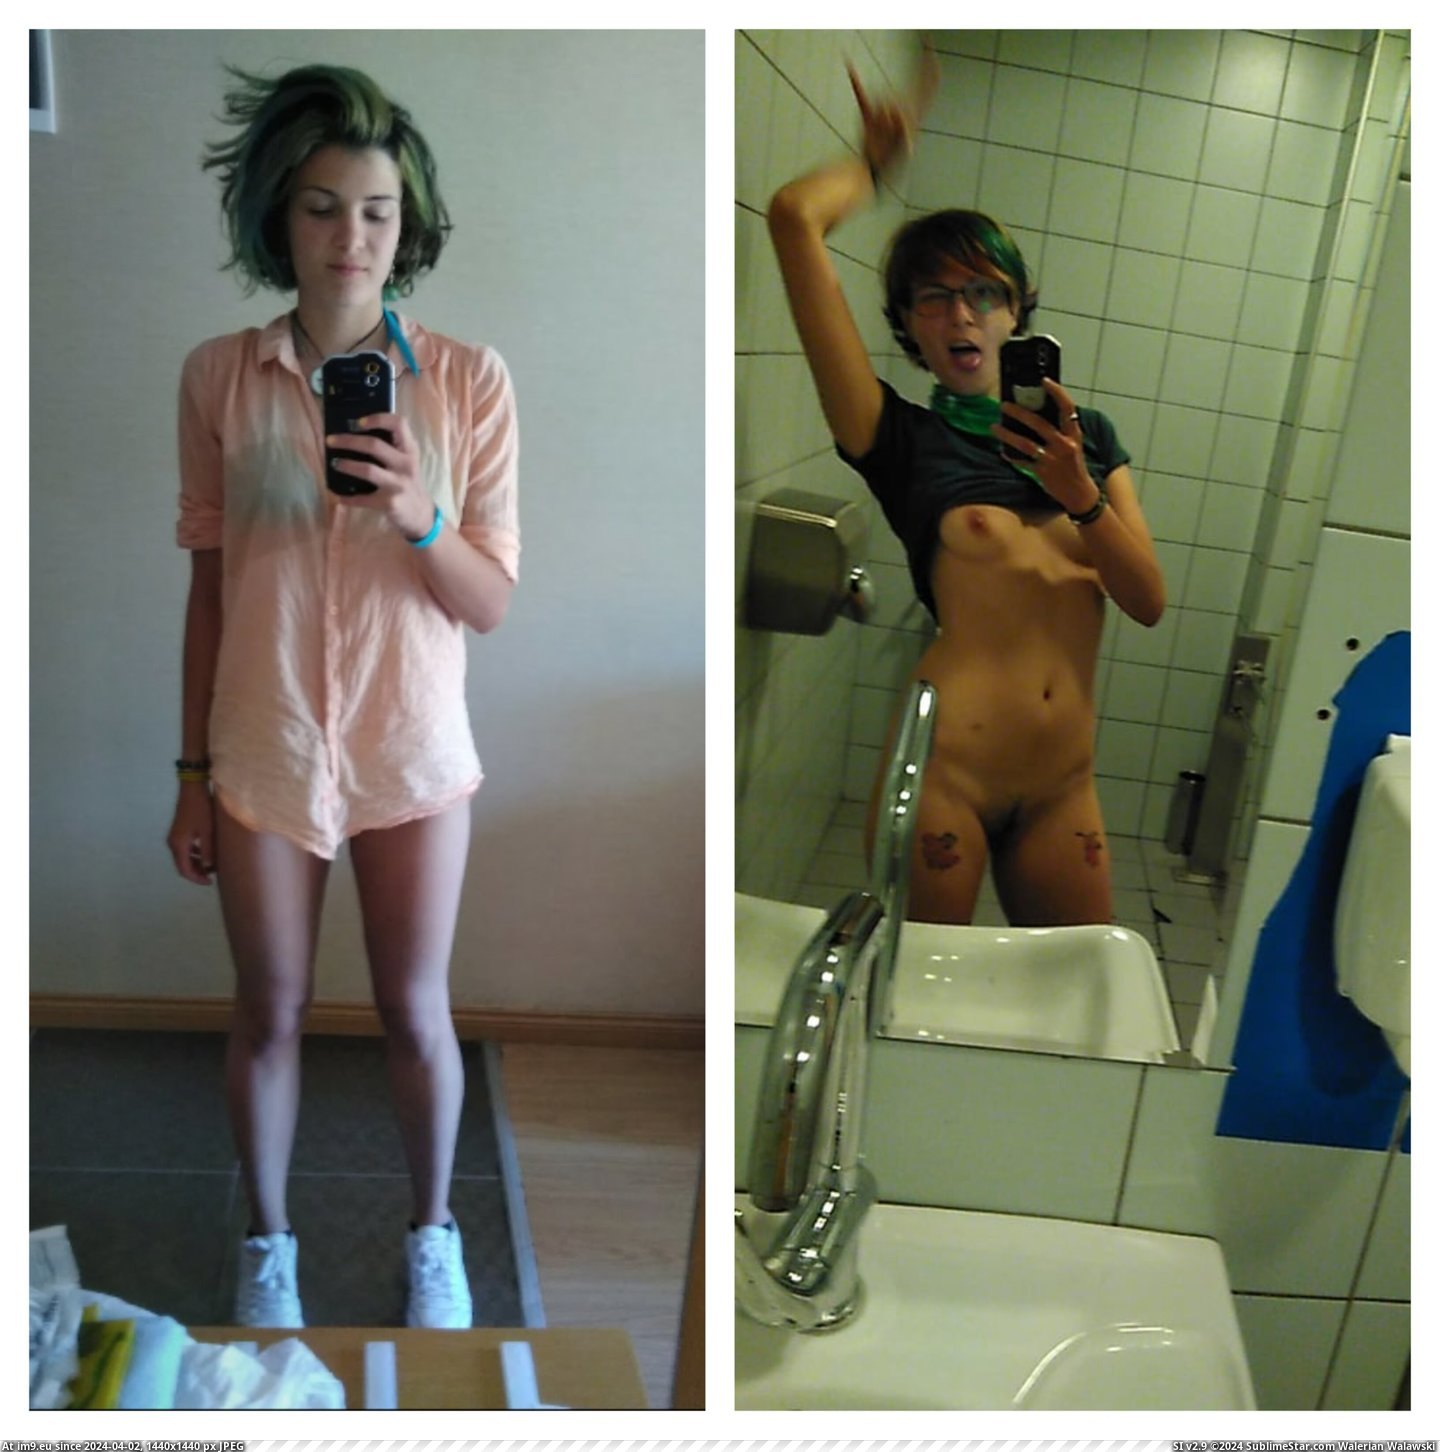 #Tits #Pussy #Dressed #Collage #Onoff #Clothed #Undressed #Unclothed Valentinaon_off Pic. (Image of album ))